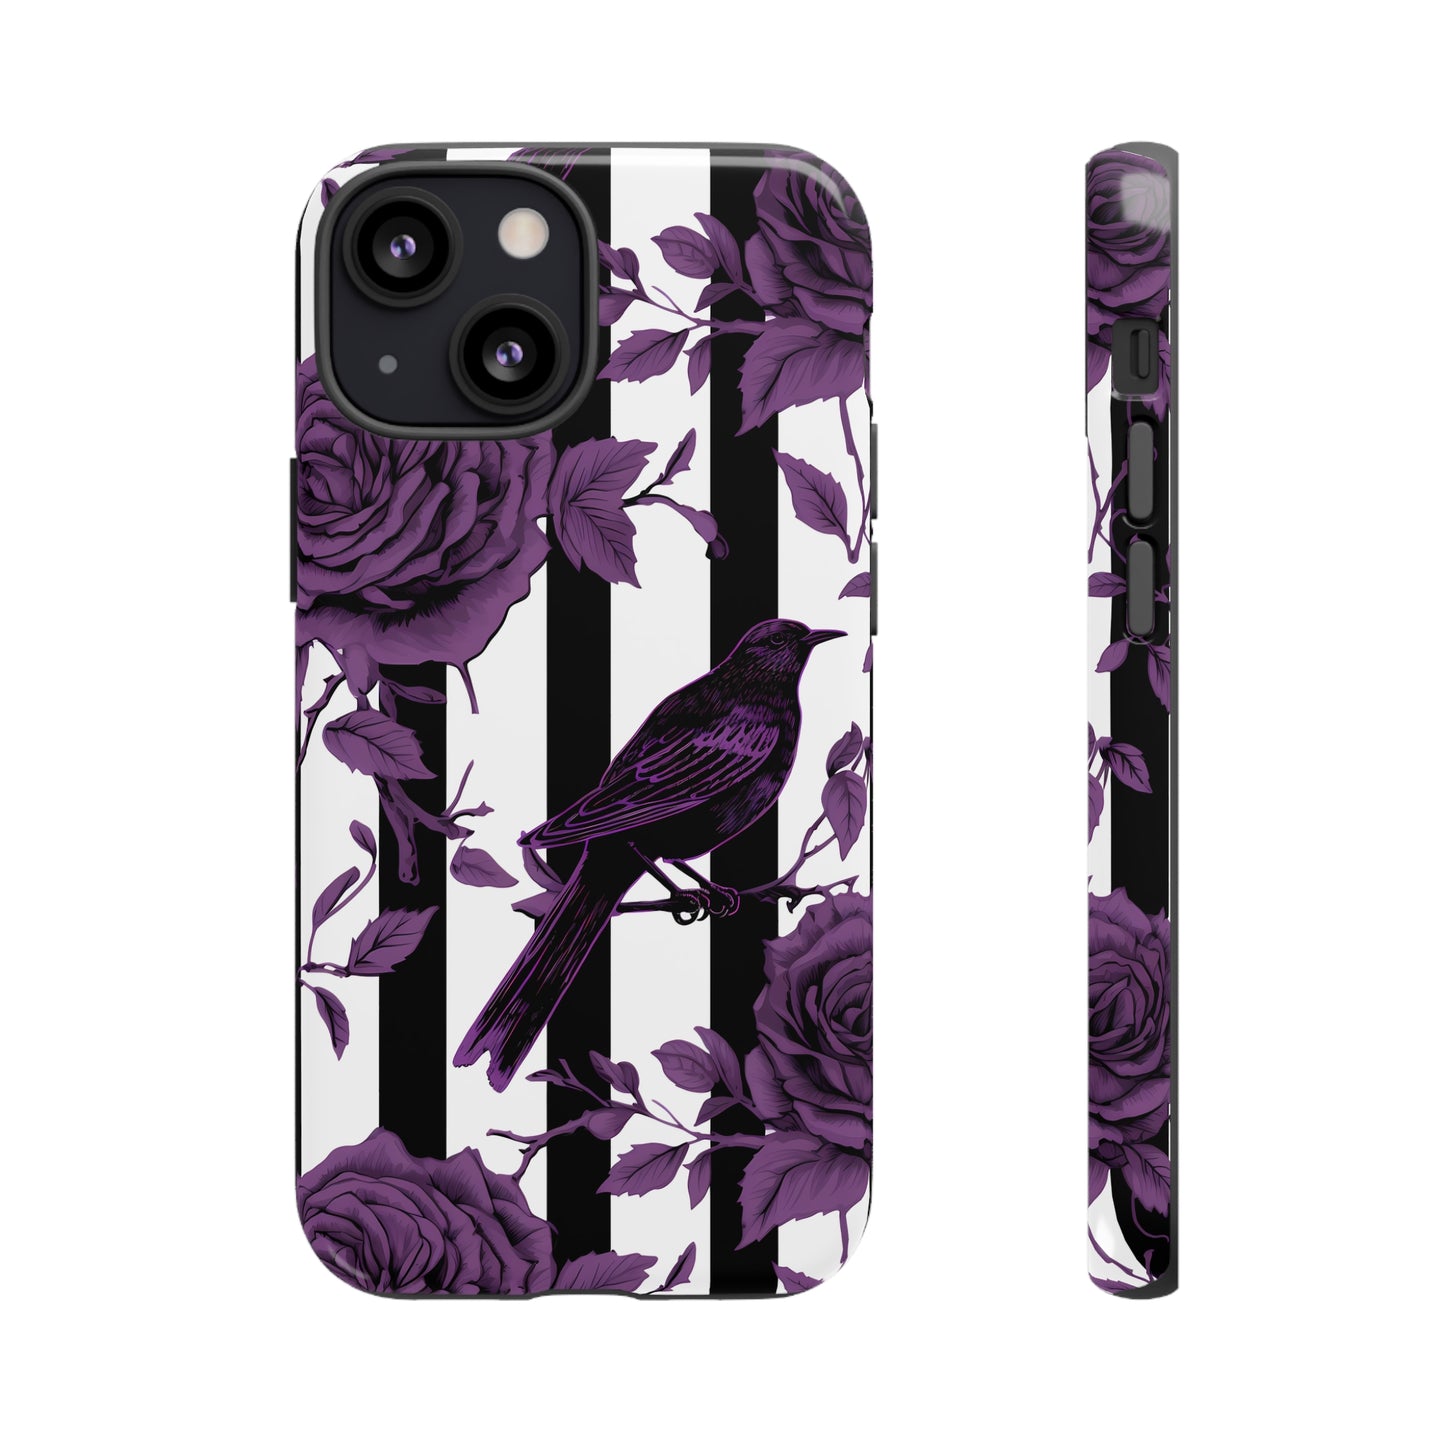 Striped Crows and Roses Tough Cases for iPhone Samsung Google PhonesPhone CaseVTZdesignsiPhone 13 MiniGlossyAccessoriescrowsGlossy